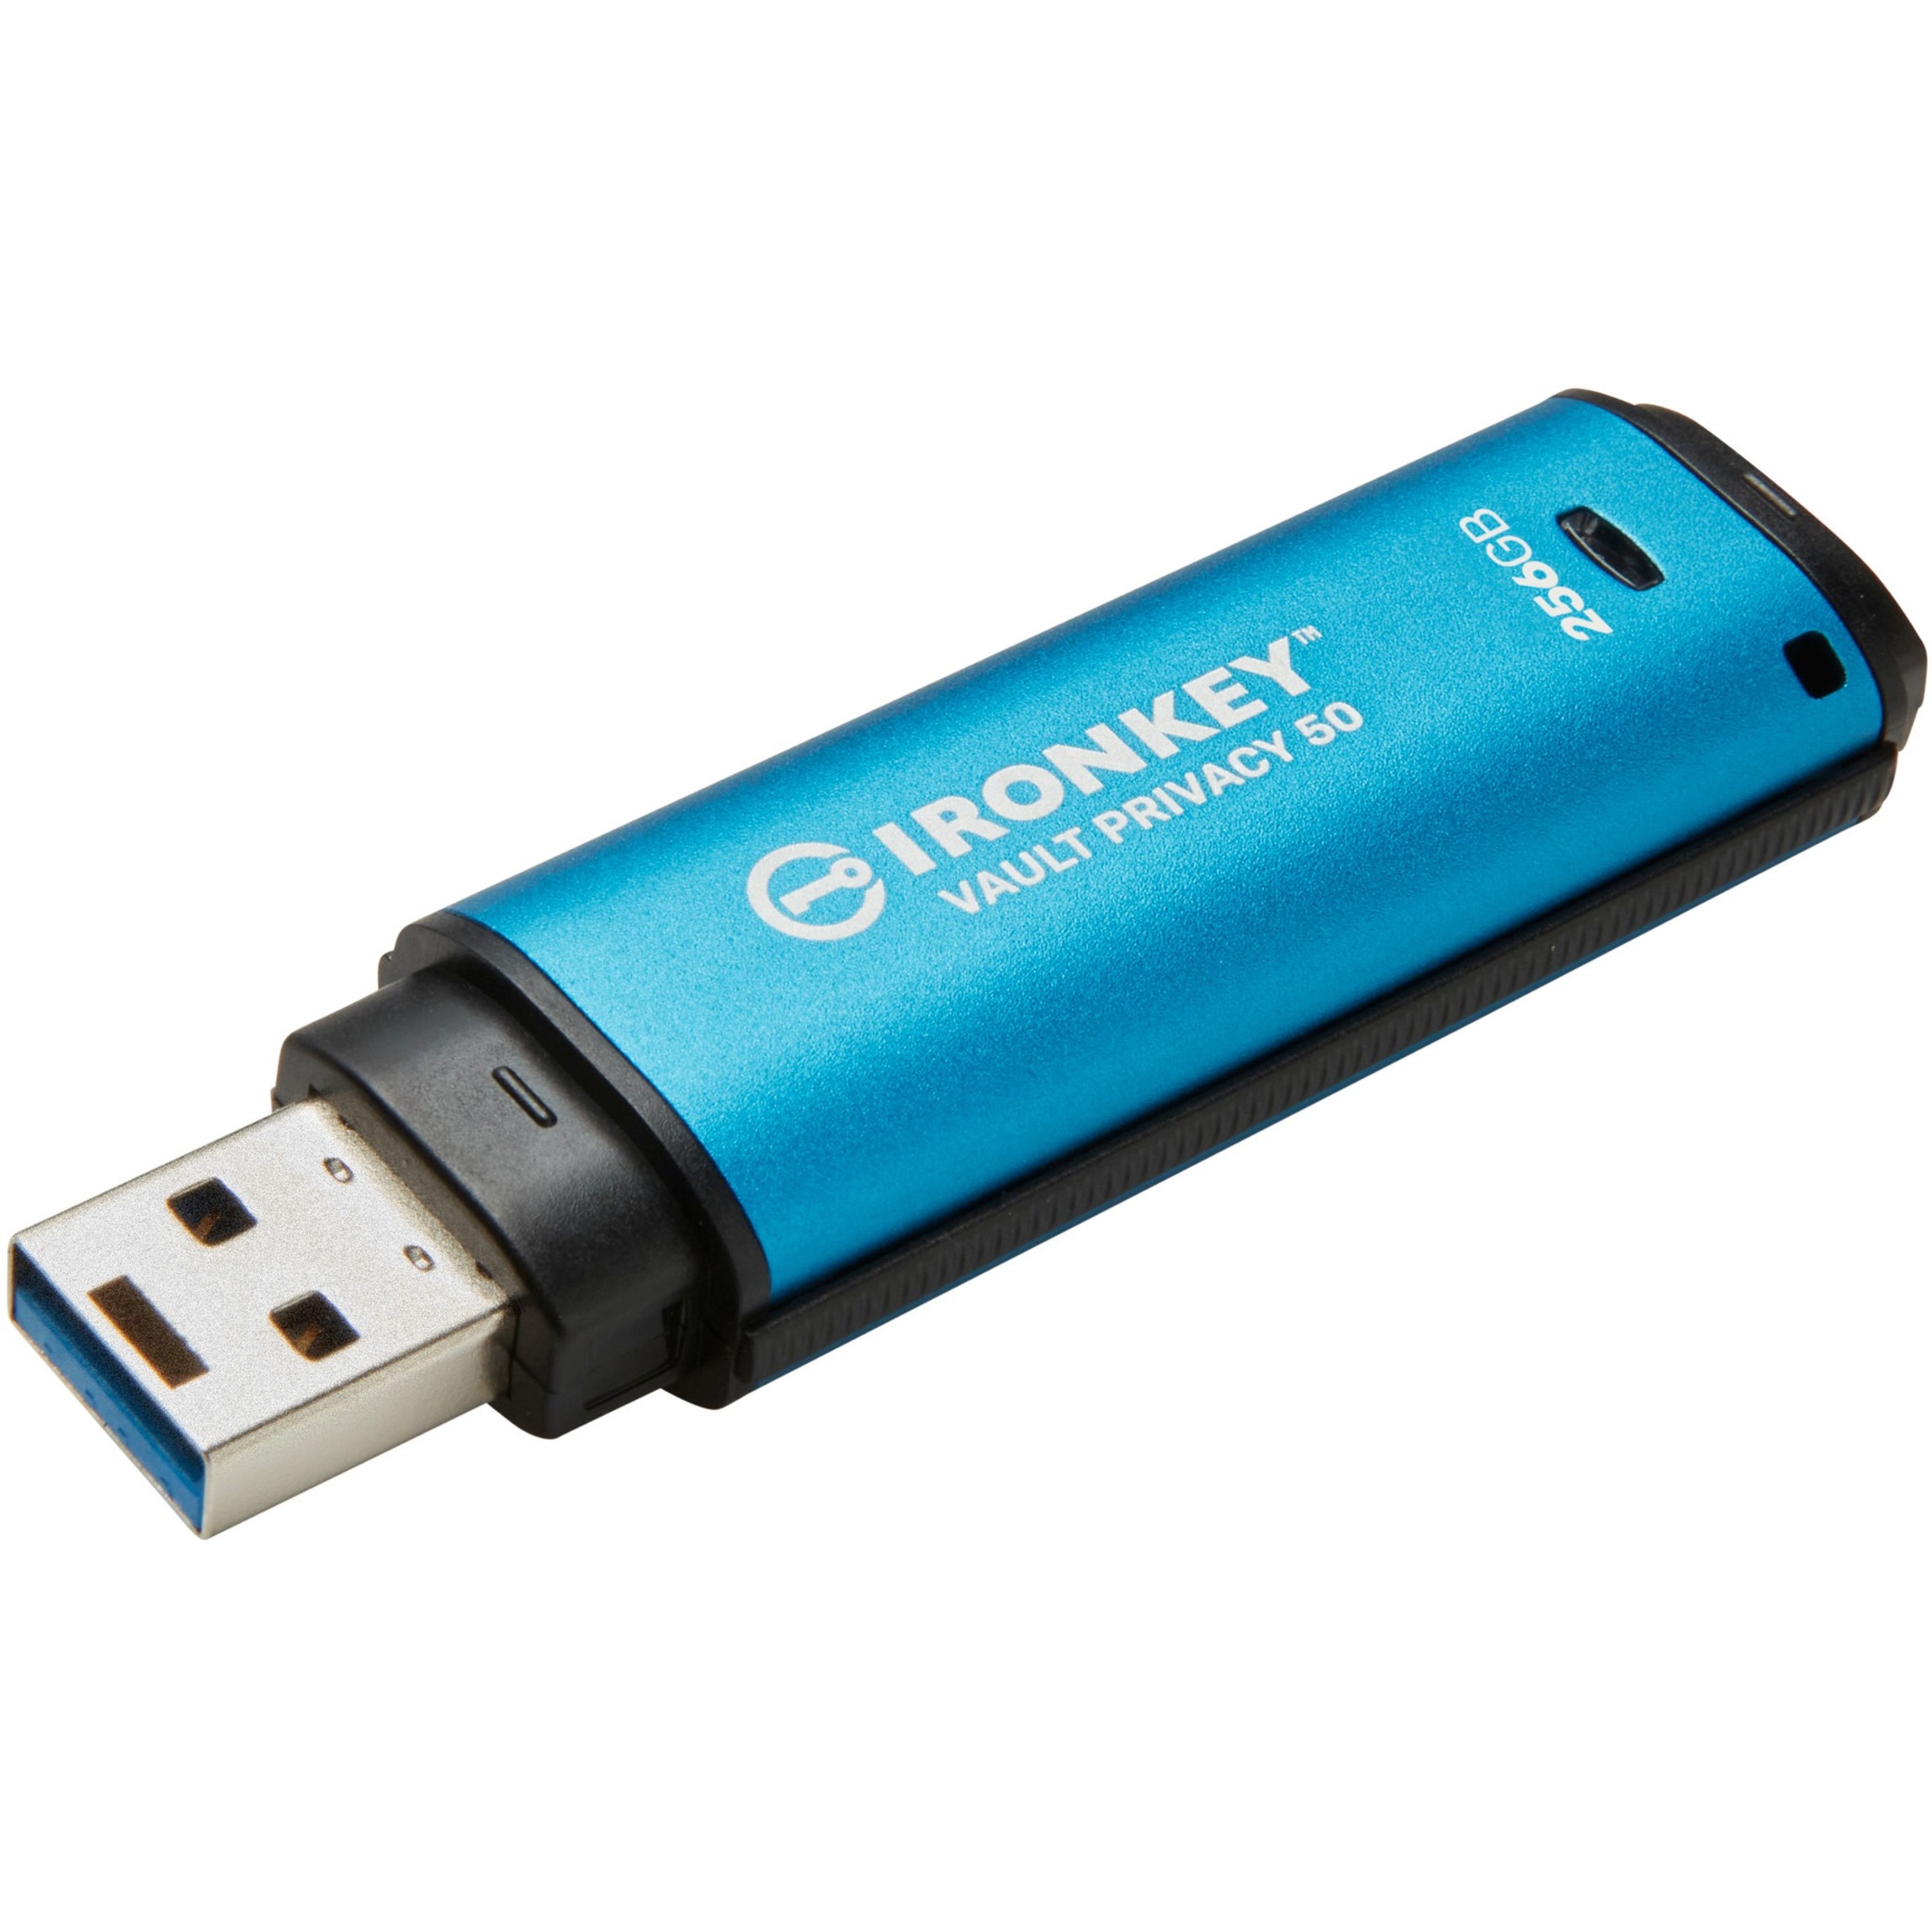 IronKey Vault Privacy 50 Series 256GB USB 3.2 (Gen 1) Type A Flash Drive - image 2 of 9